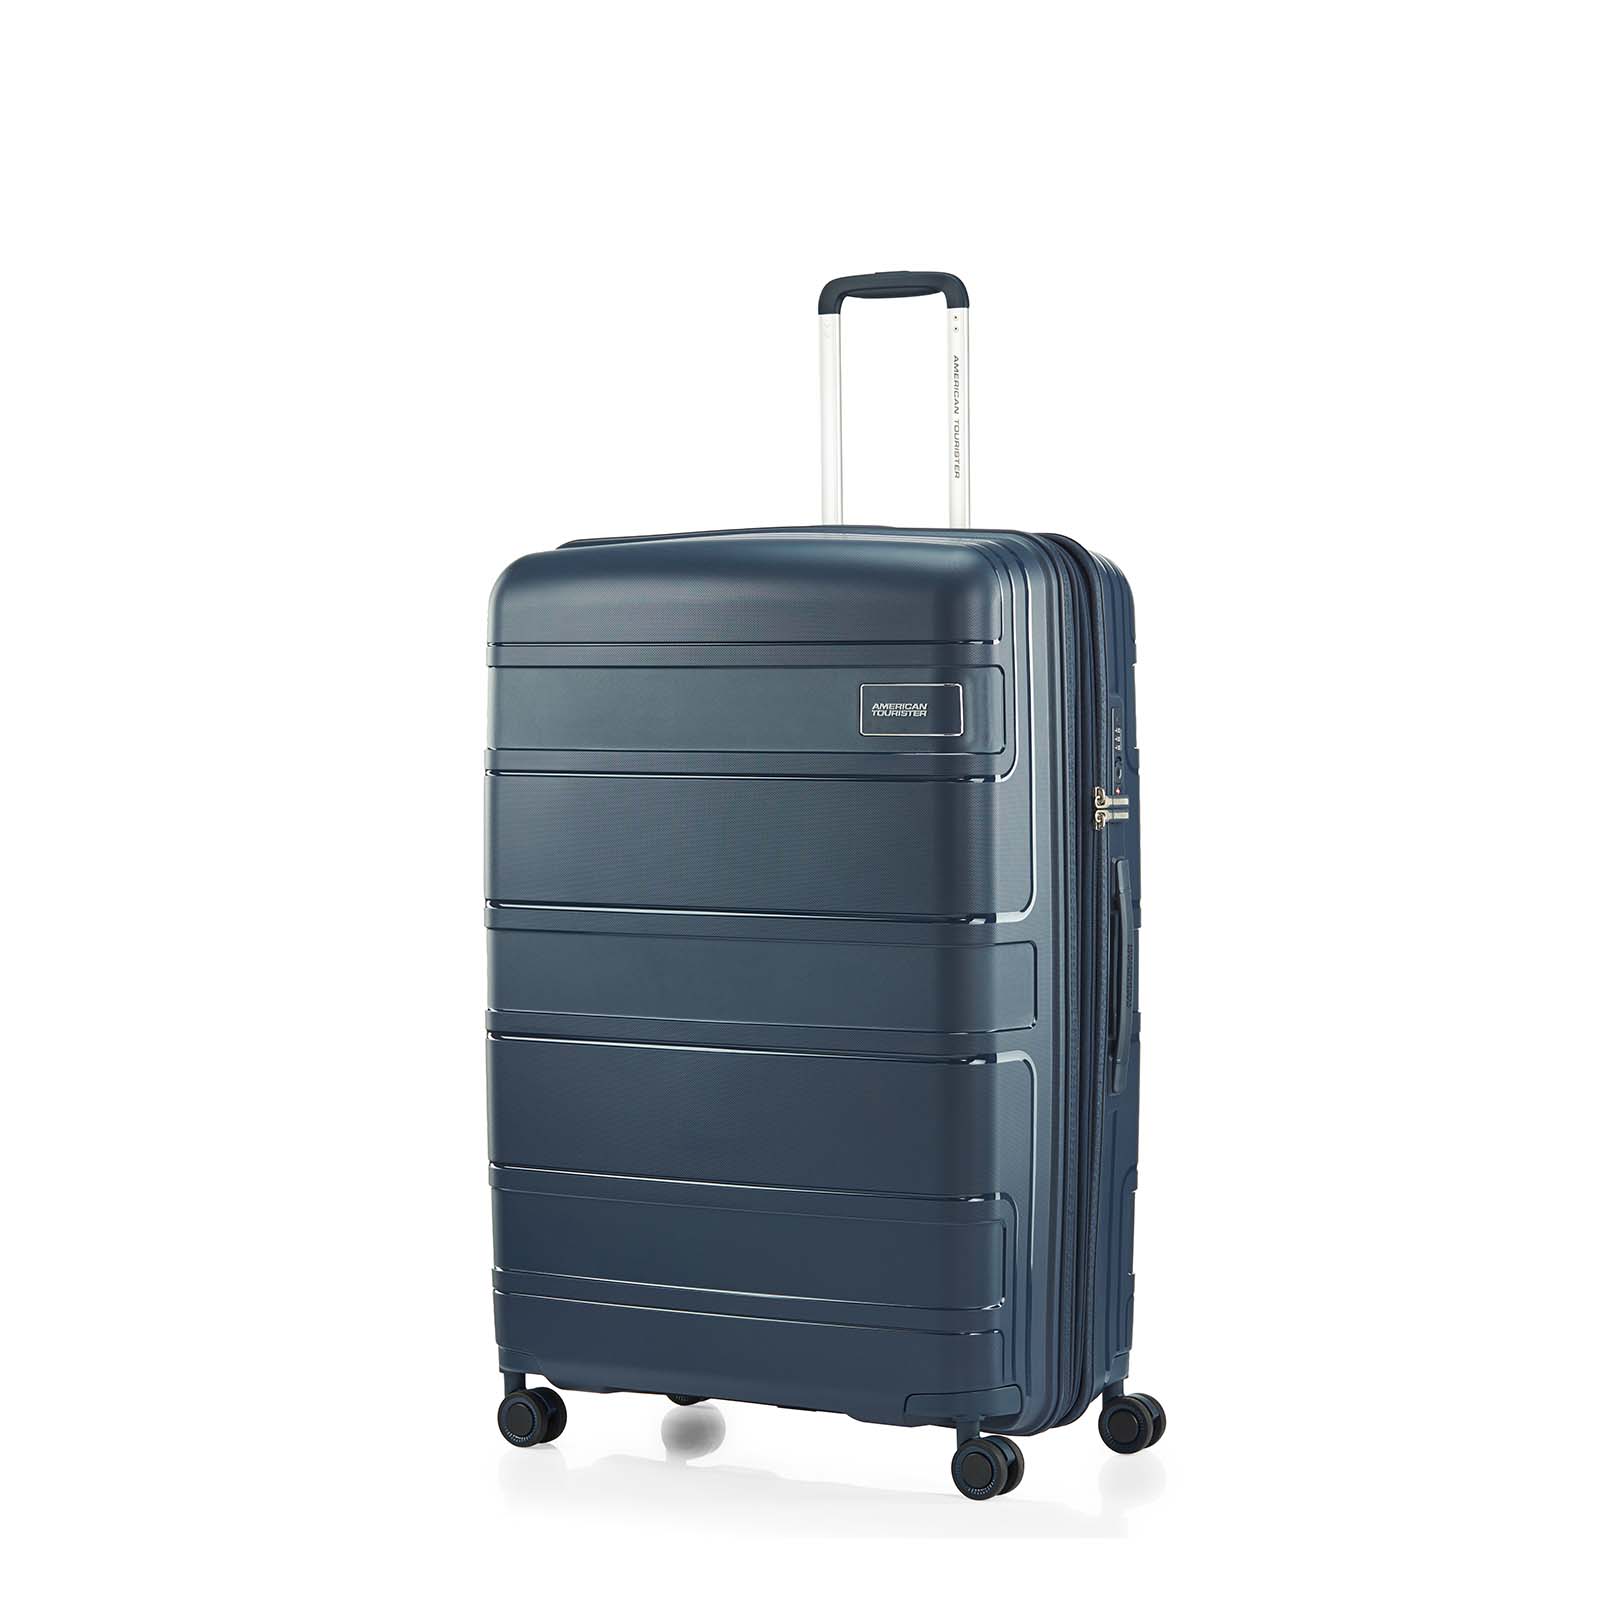 American-Tourister-Light-Max-82cm-Suitcase-Navy-Front-Angle